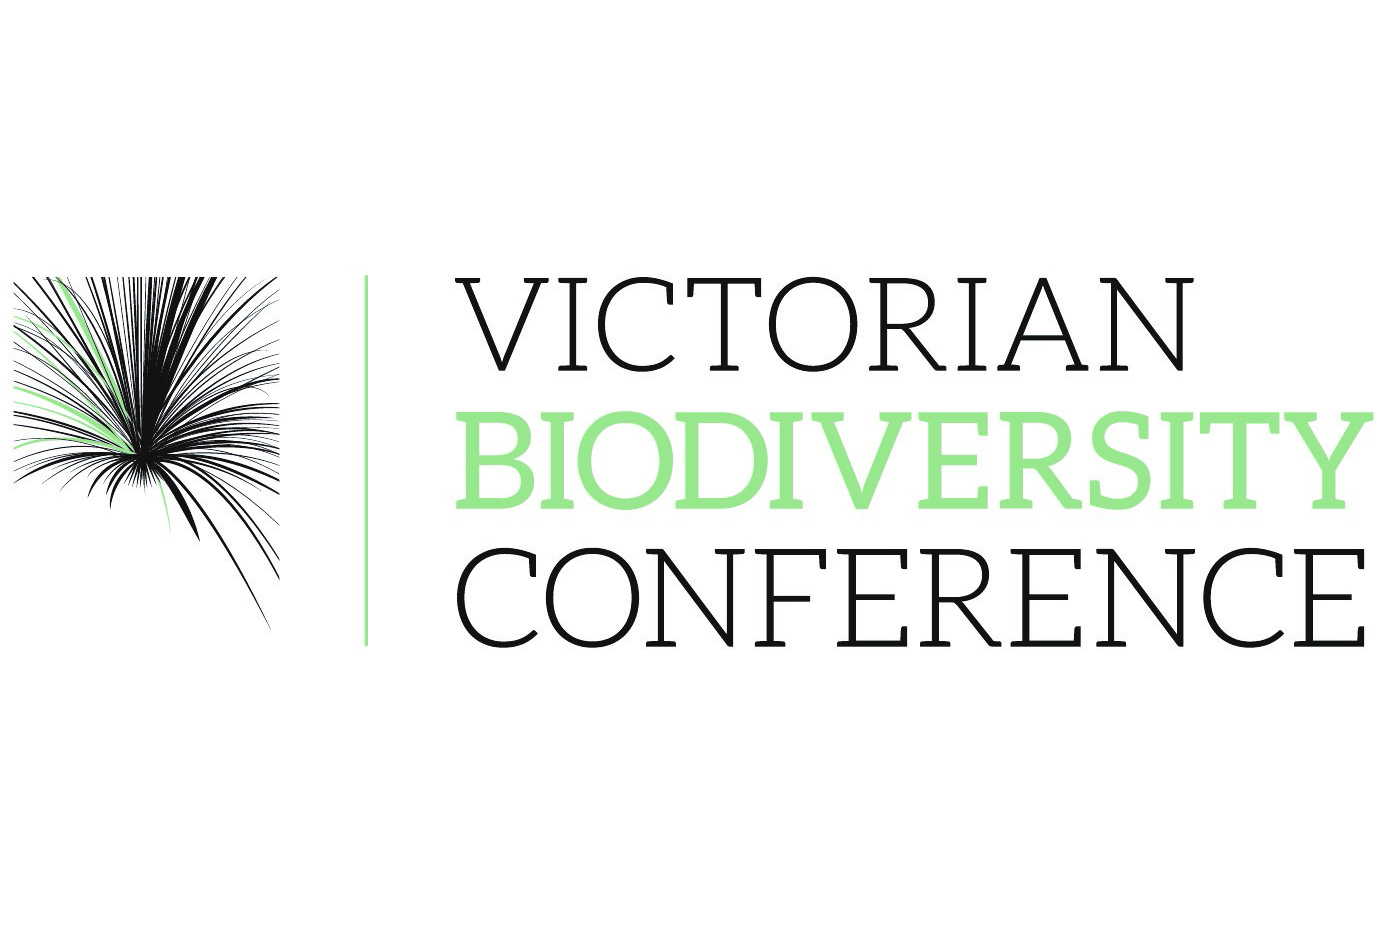 Report from the inaugural Victorian Biodiversity Conference